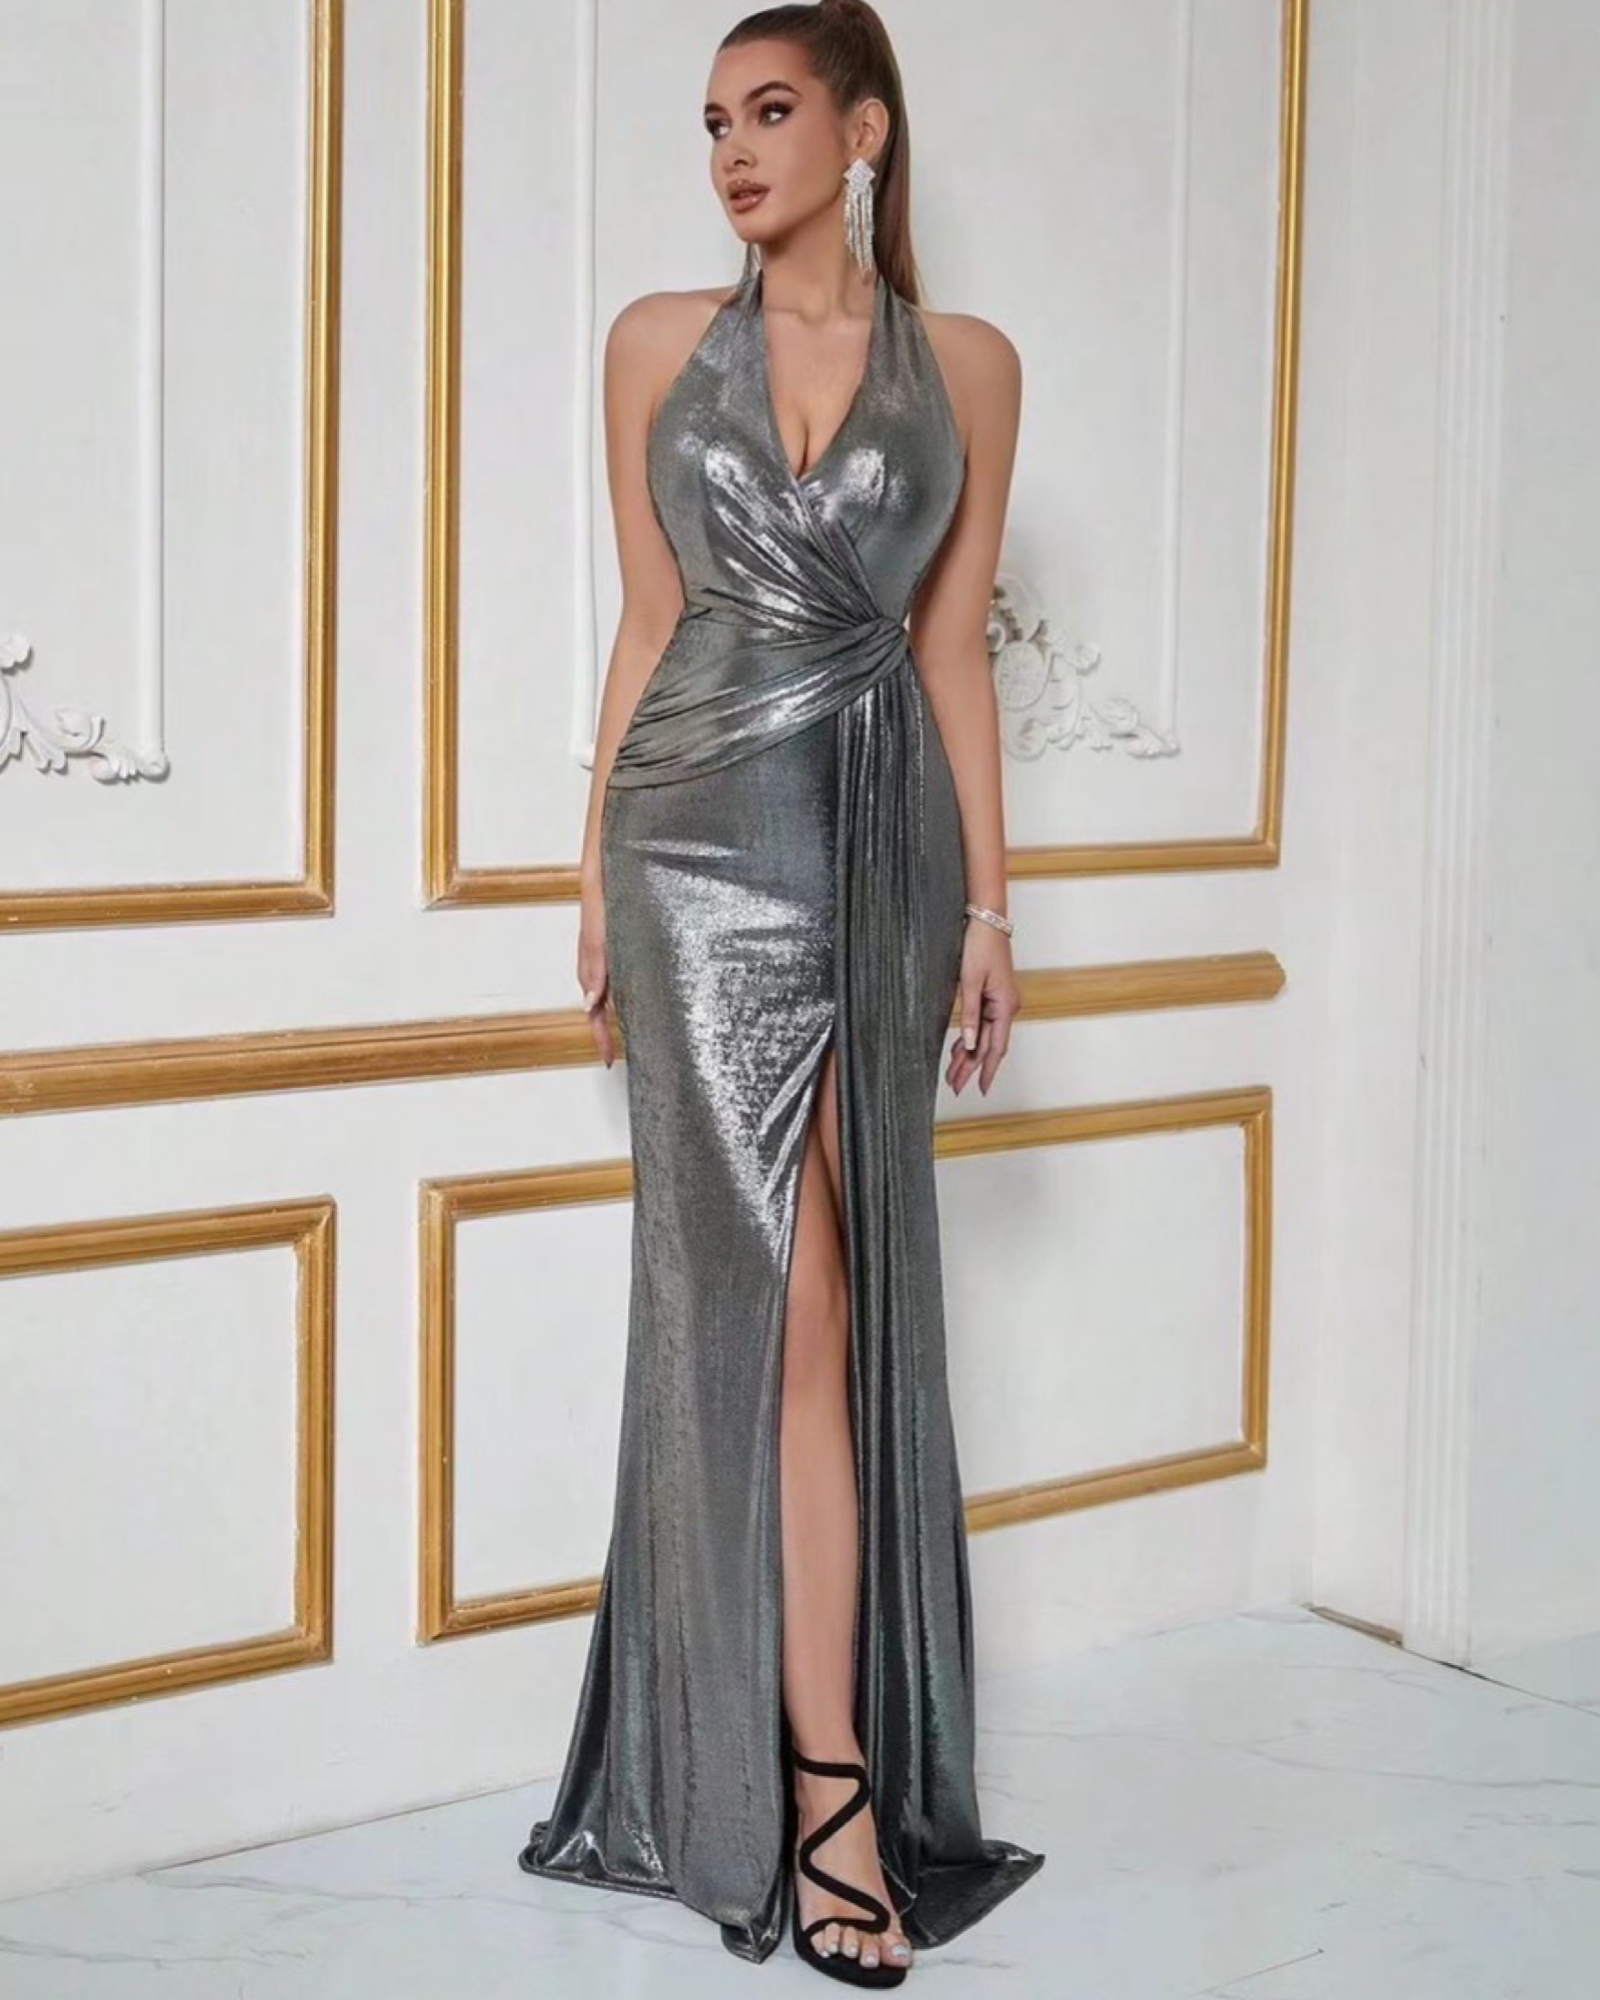 Long sleeveless metallic dress by obscur